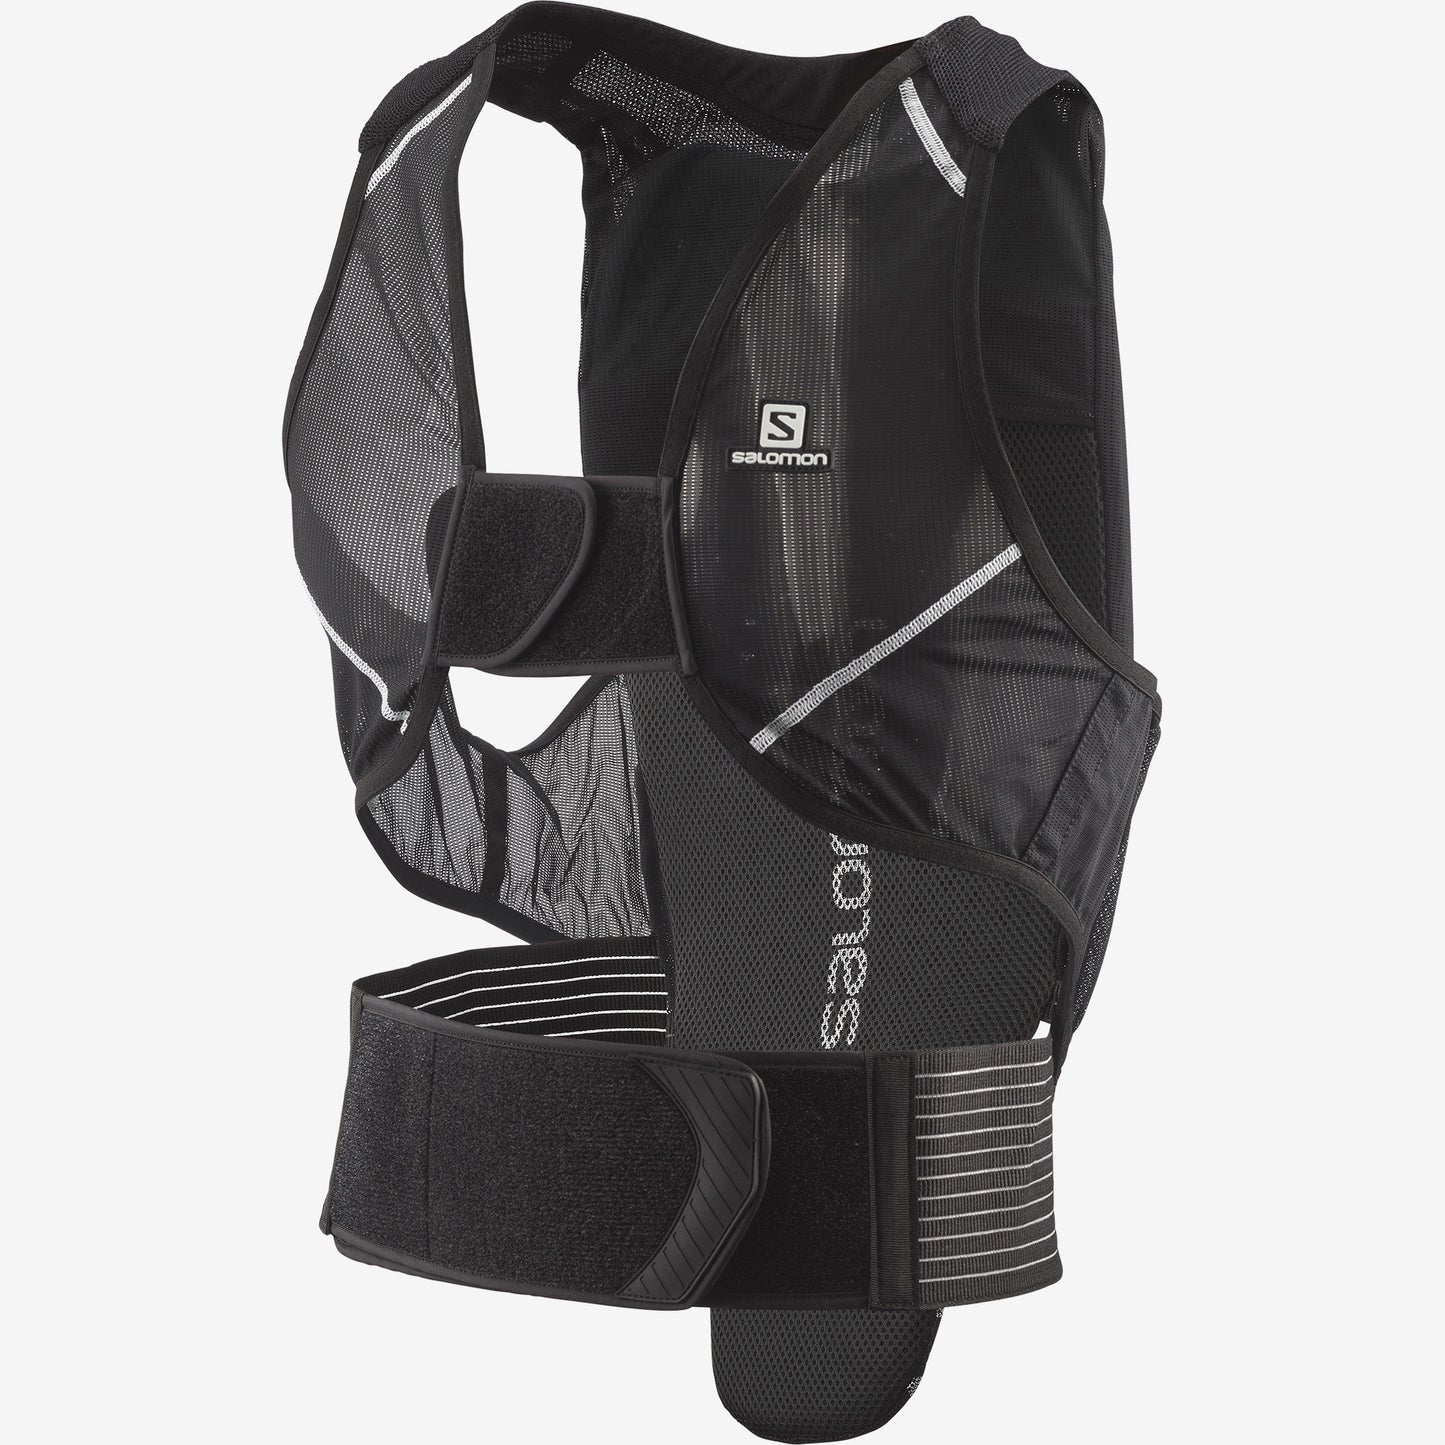 FLEXCELL PRO BACK PROTECTION